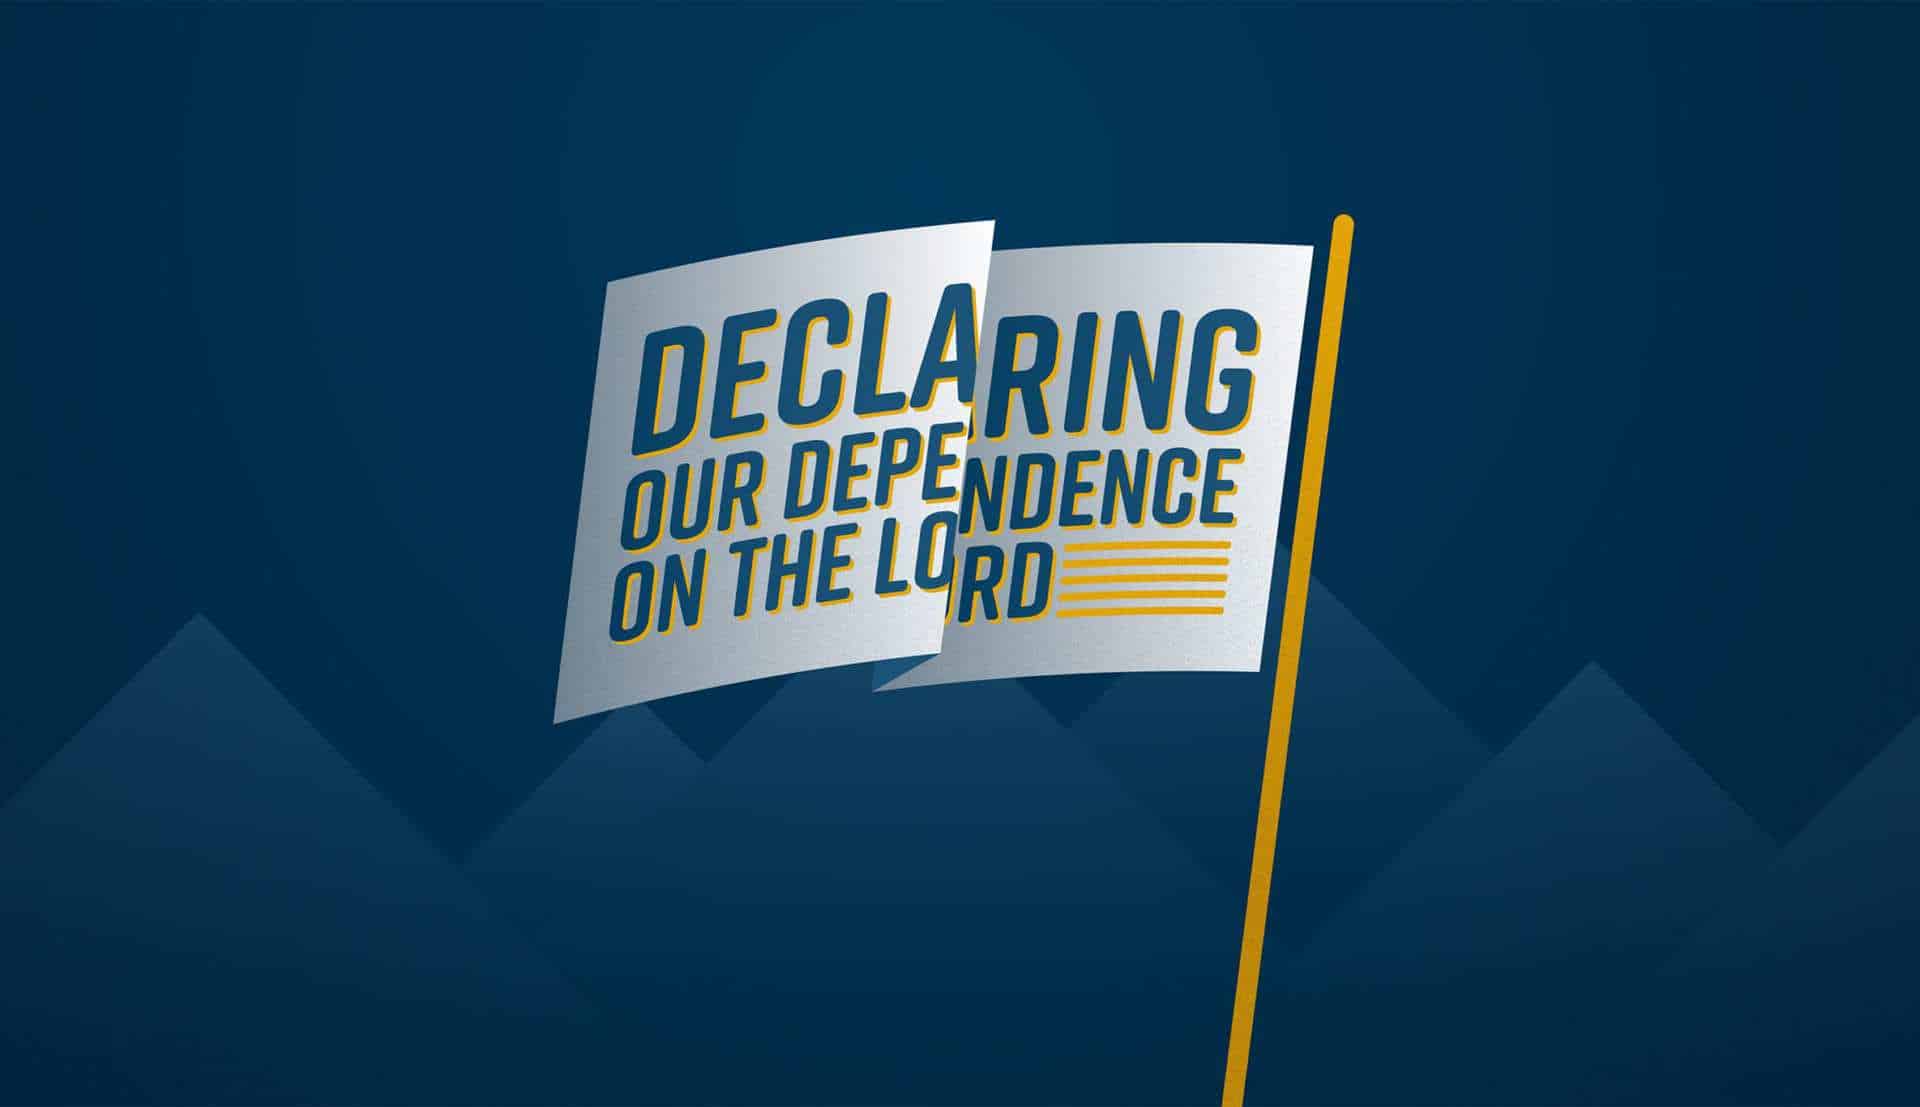 Declaring our dependence on the Lord - Prayer Service - 7/5/20